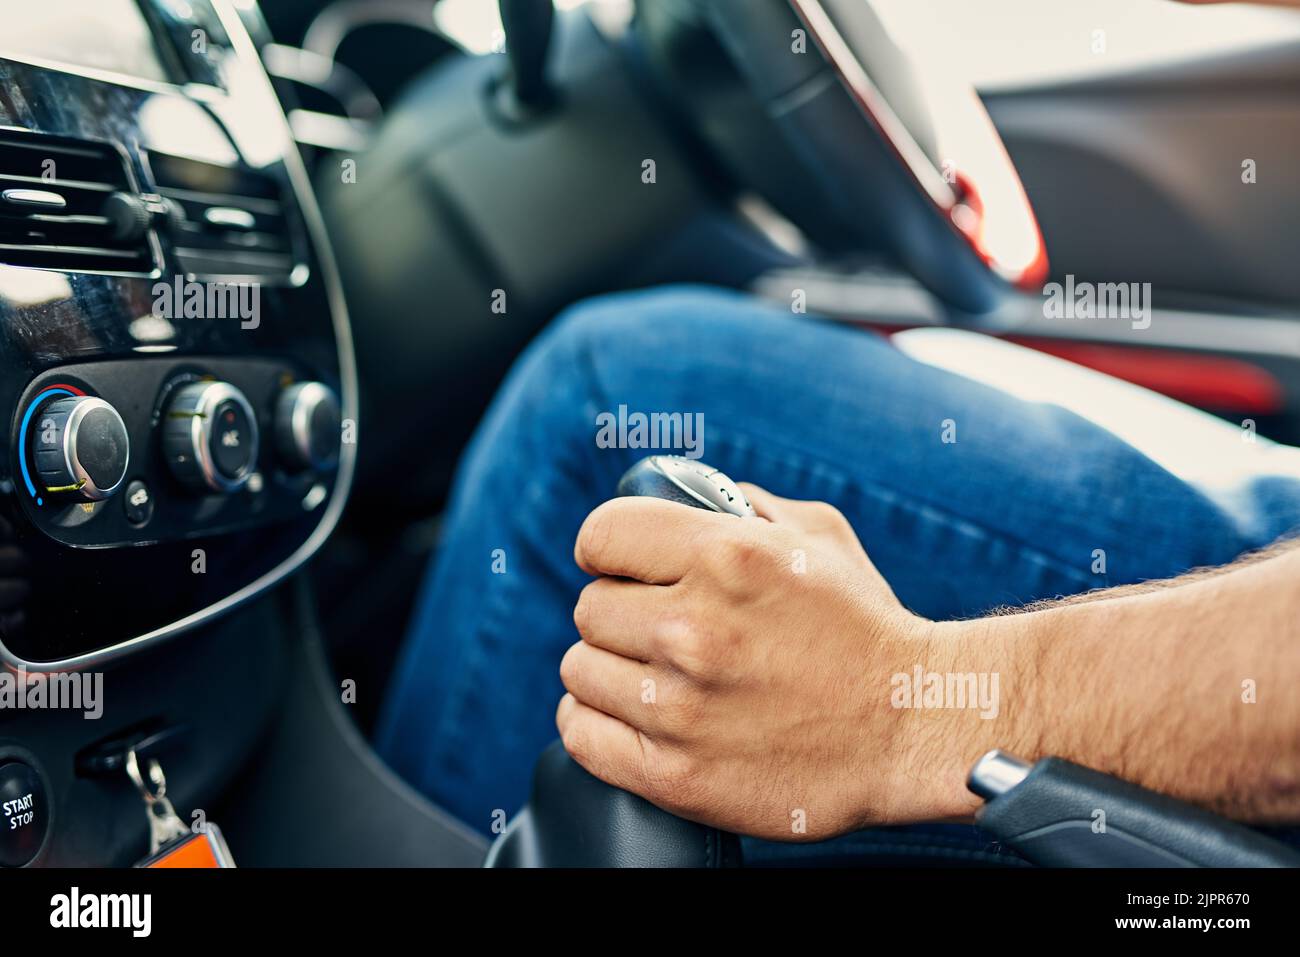 Gear up and get going. Closeup shot of a driver changing the gears of a motor vehicle. Stock Photo